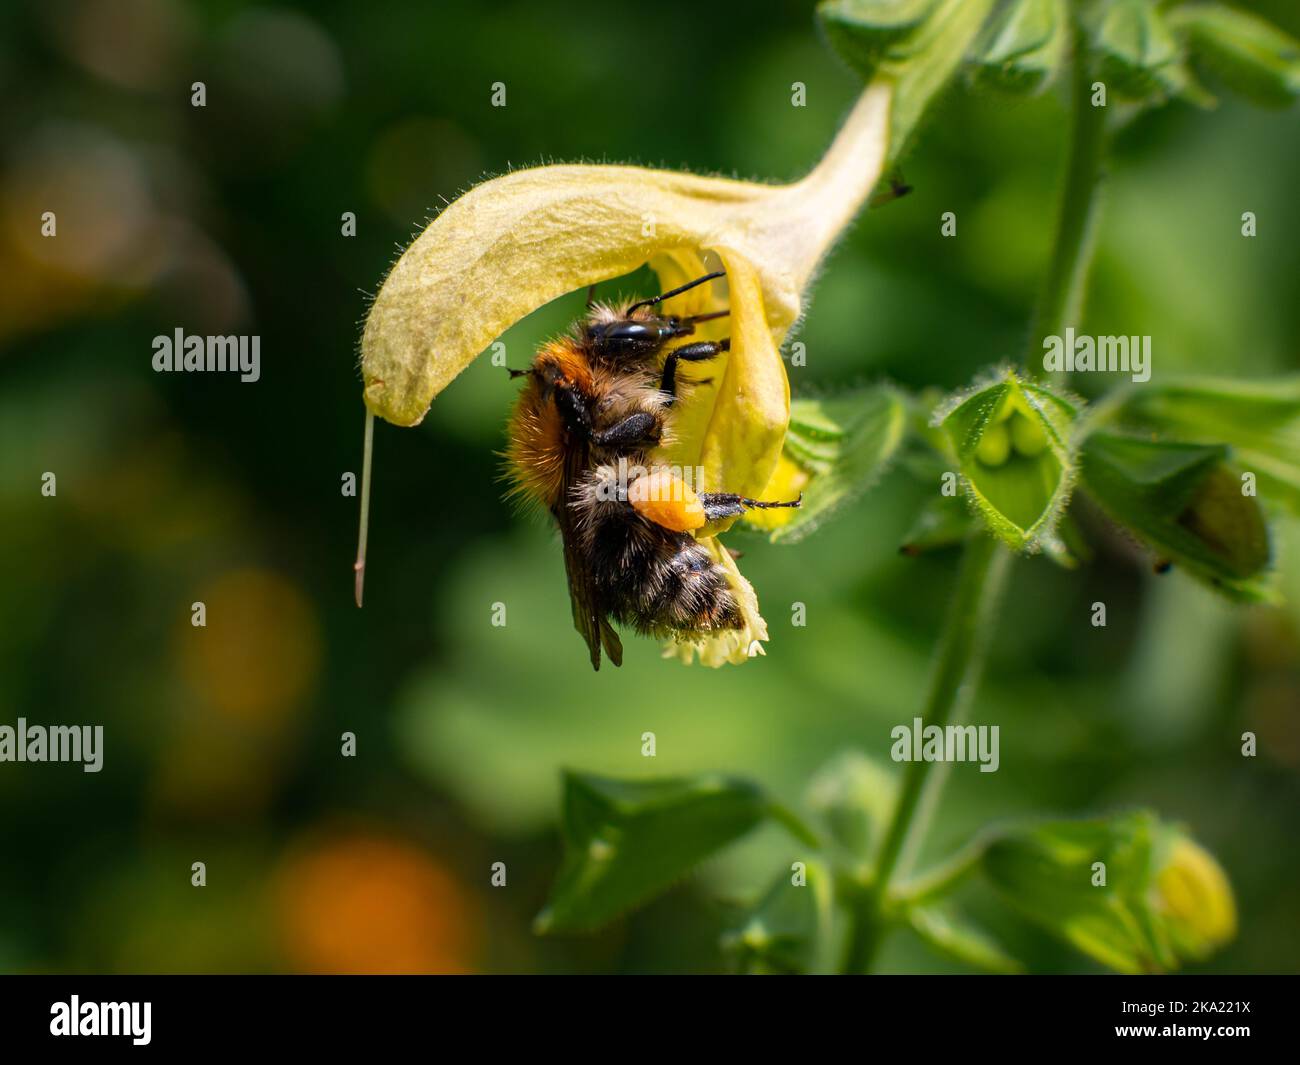 Bee in a flower with pollen on the legs. The insect is in a yellow blossom. Close-up of the wild insect in a German garden. Fine details are visible. Stock Photo